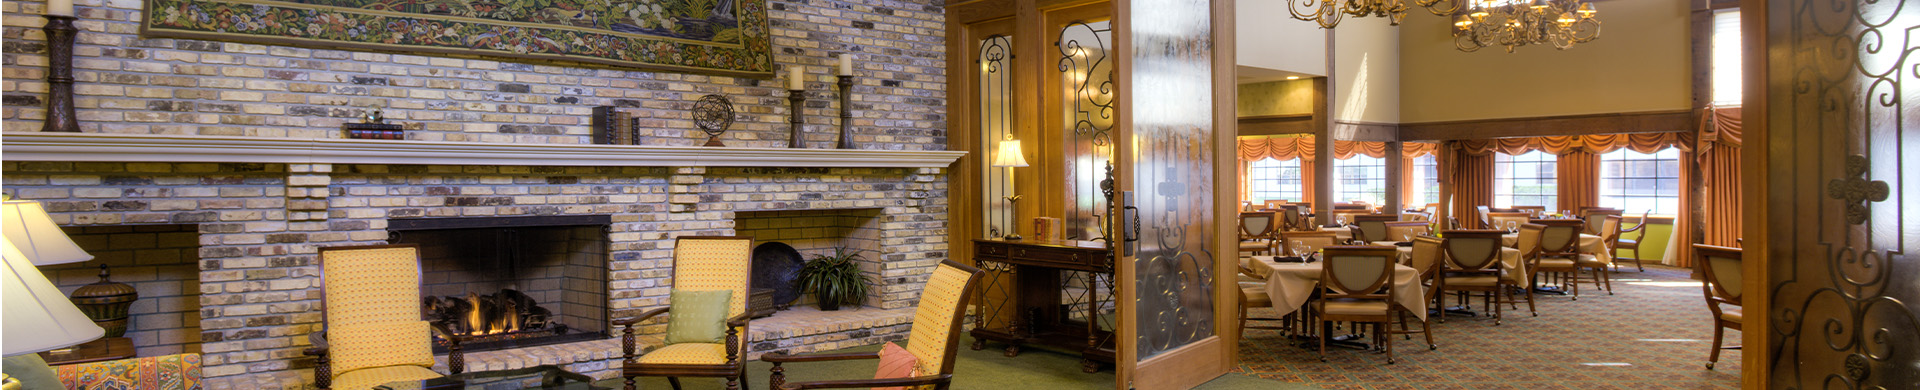 View of the formal dining room next to a common seating area beside a cozy fireplace.